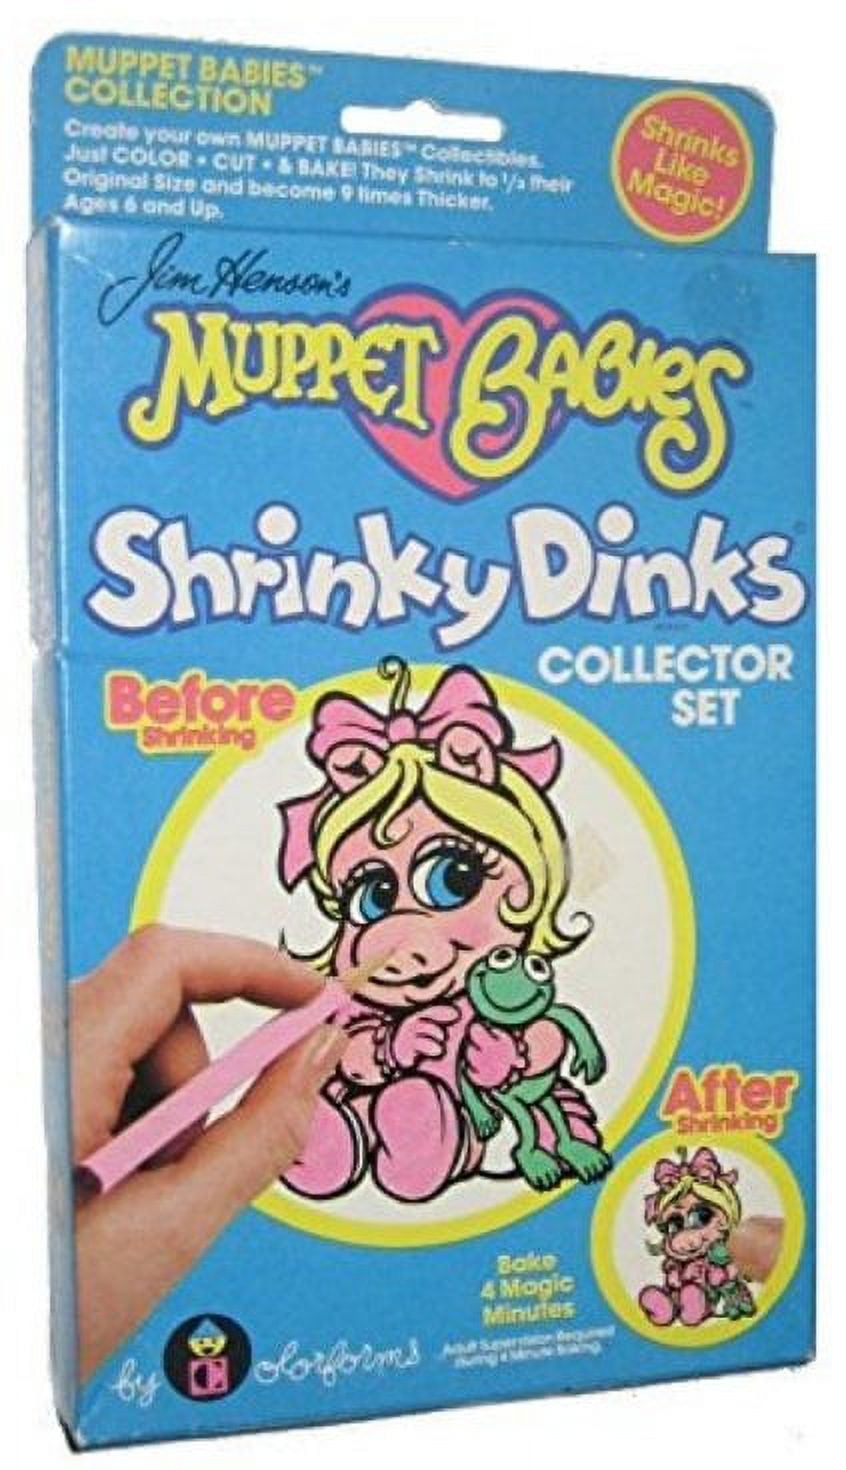 Shrinky Dinks Toys & Collectibles